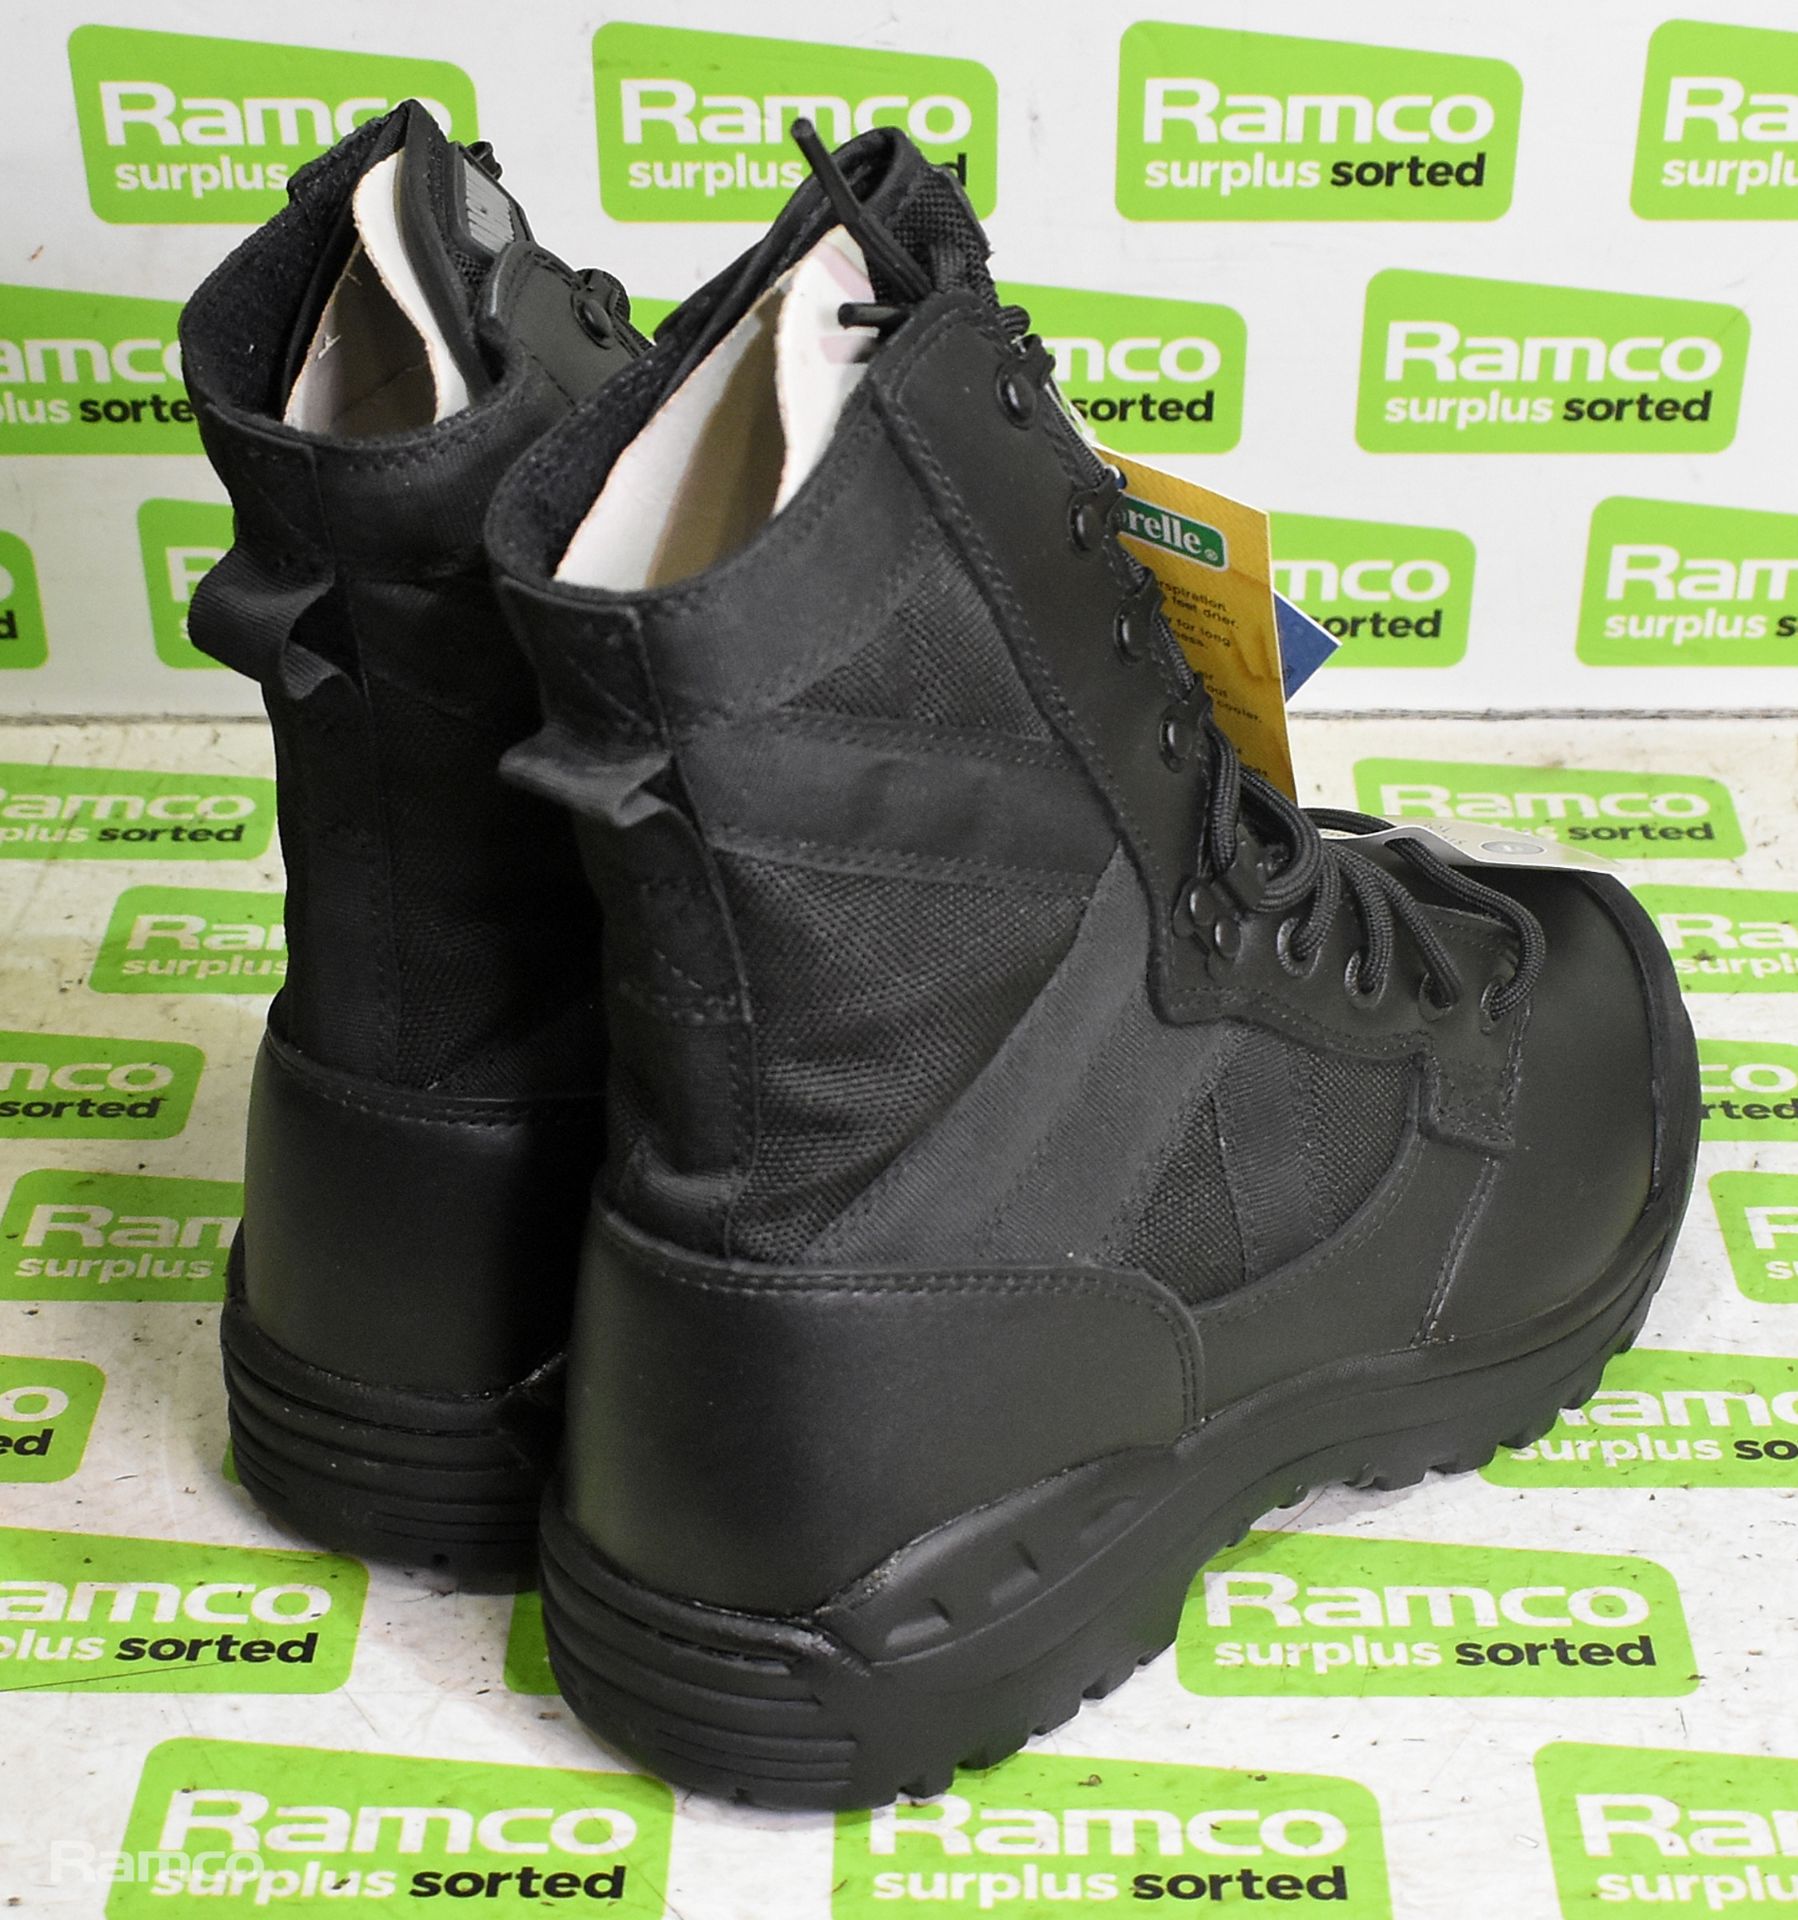 10x pairs of Magnum hot weather boots - Size 8L - Image 3 of 5